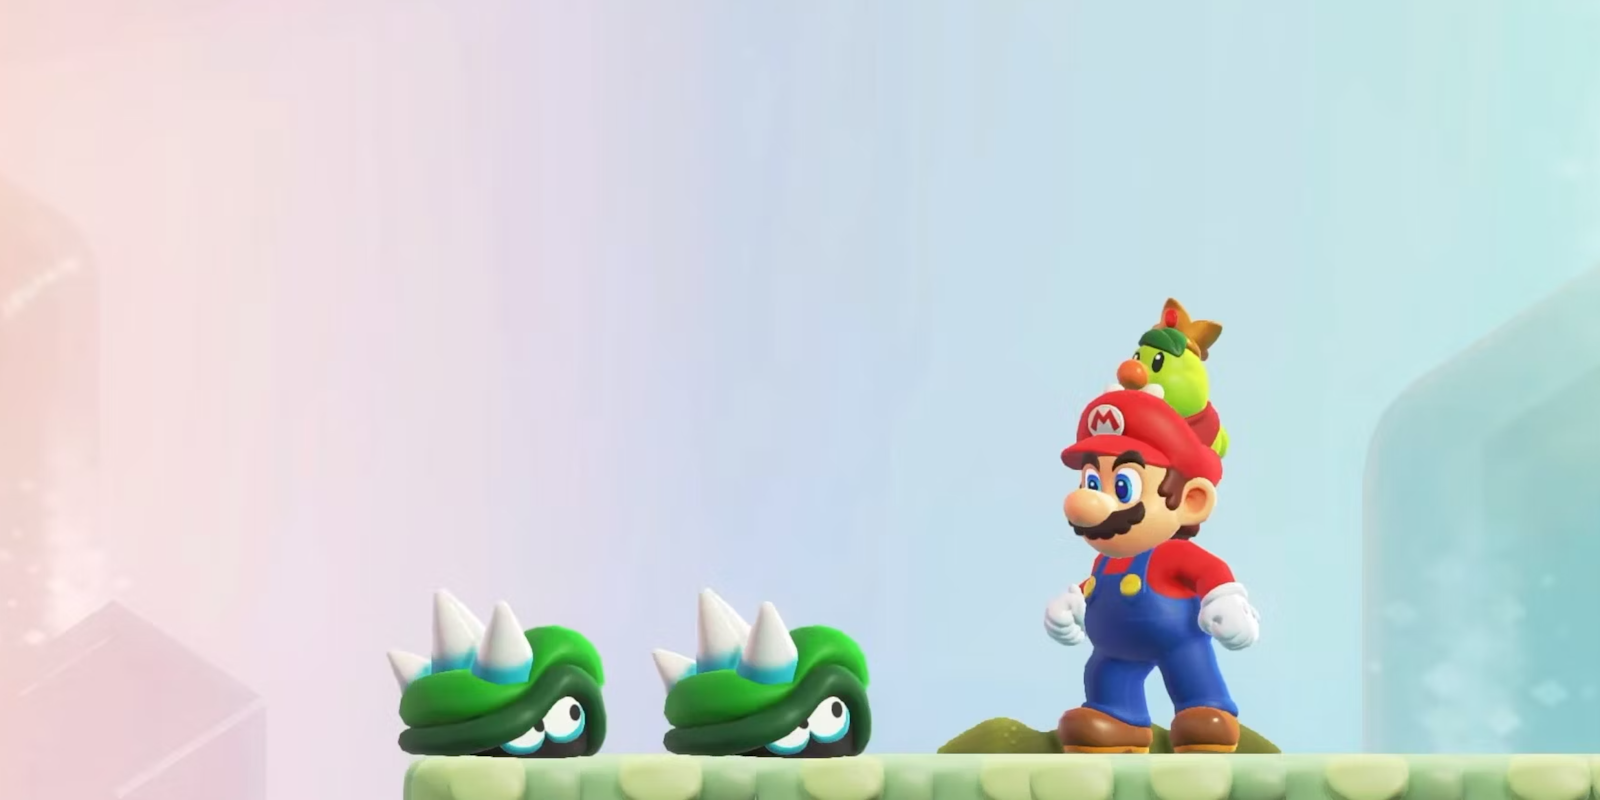 Super Mario Bros. Wonder's New Enemies by UPCGameswasremoved on